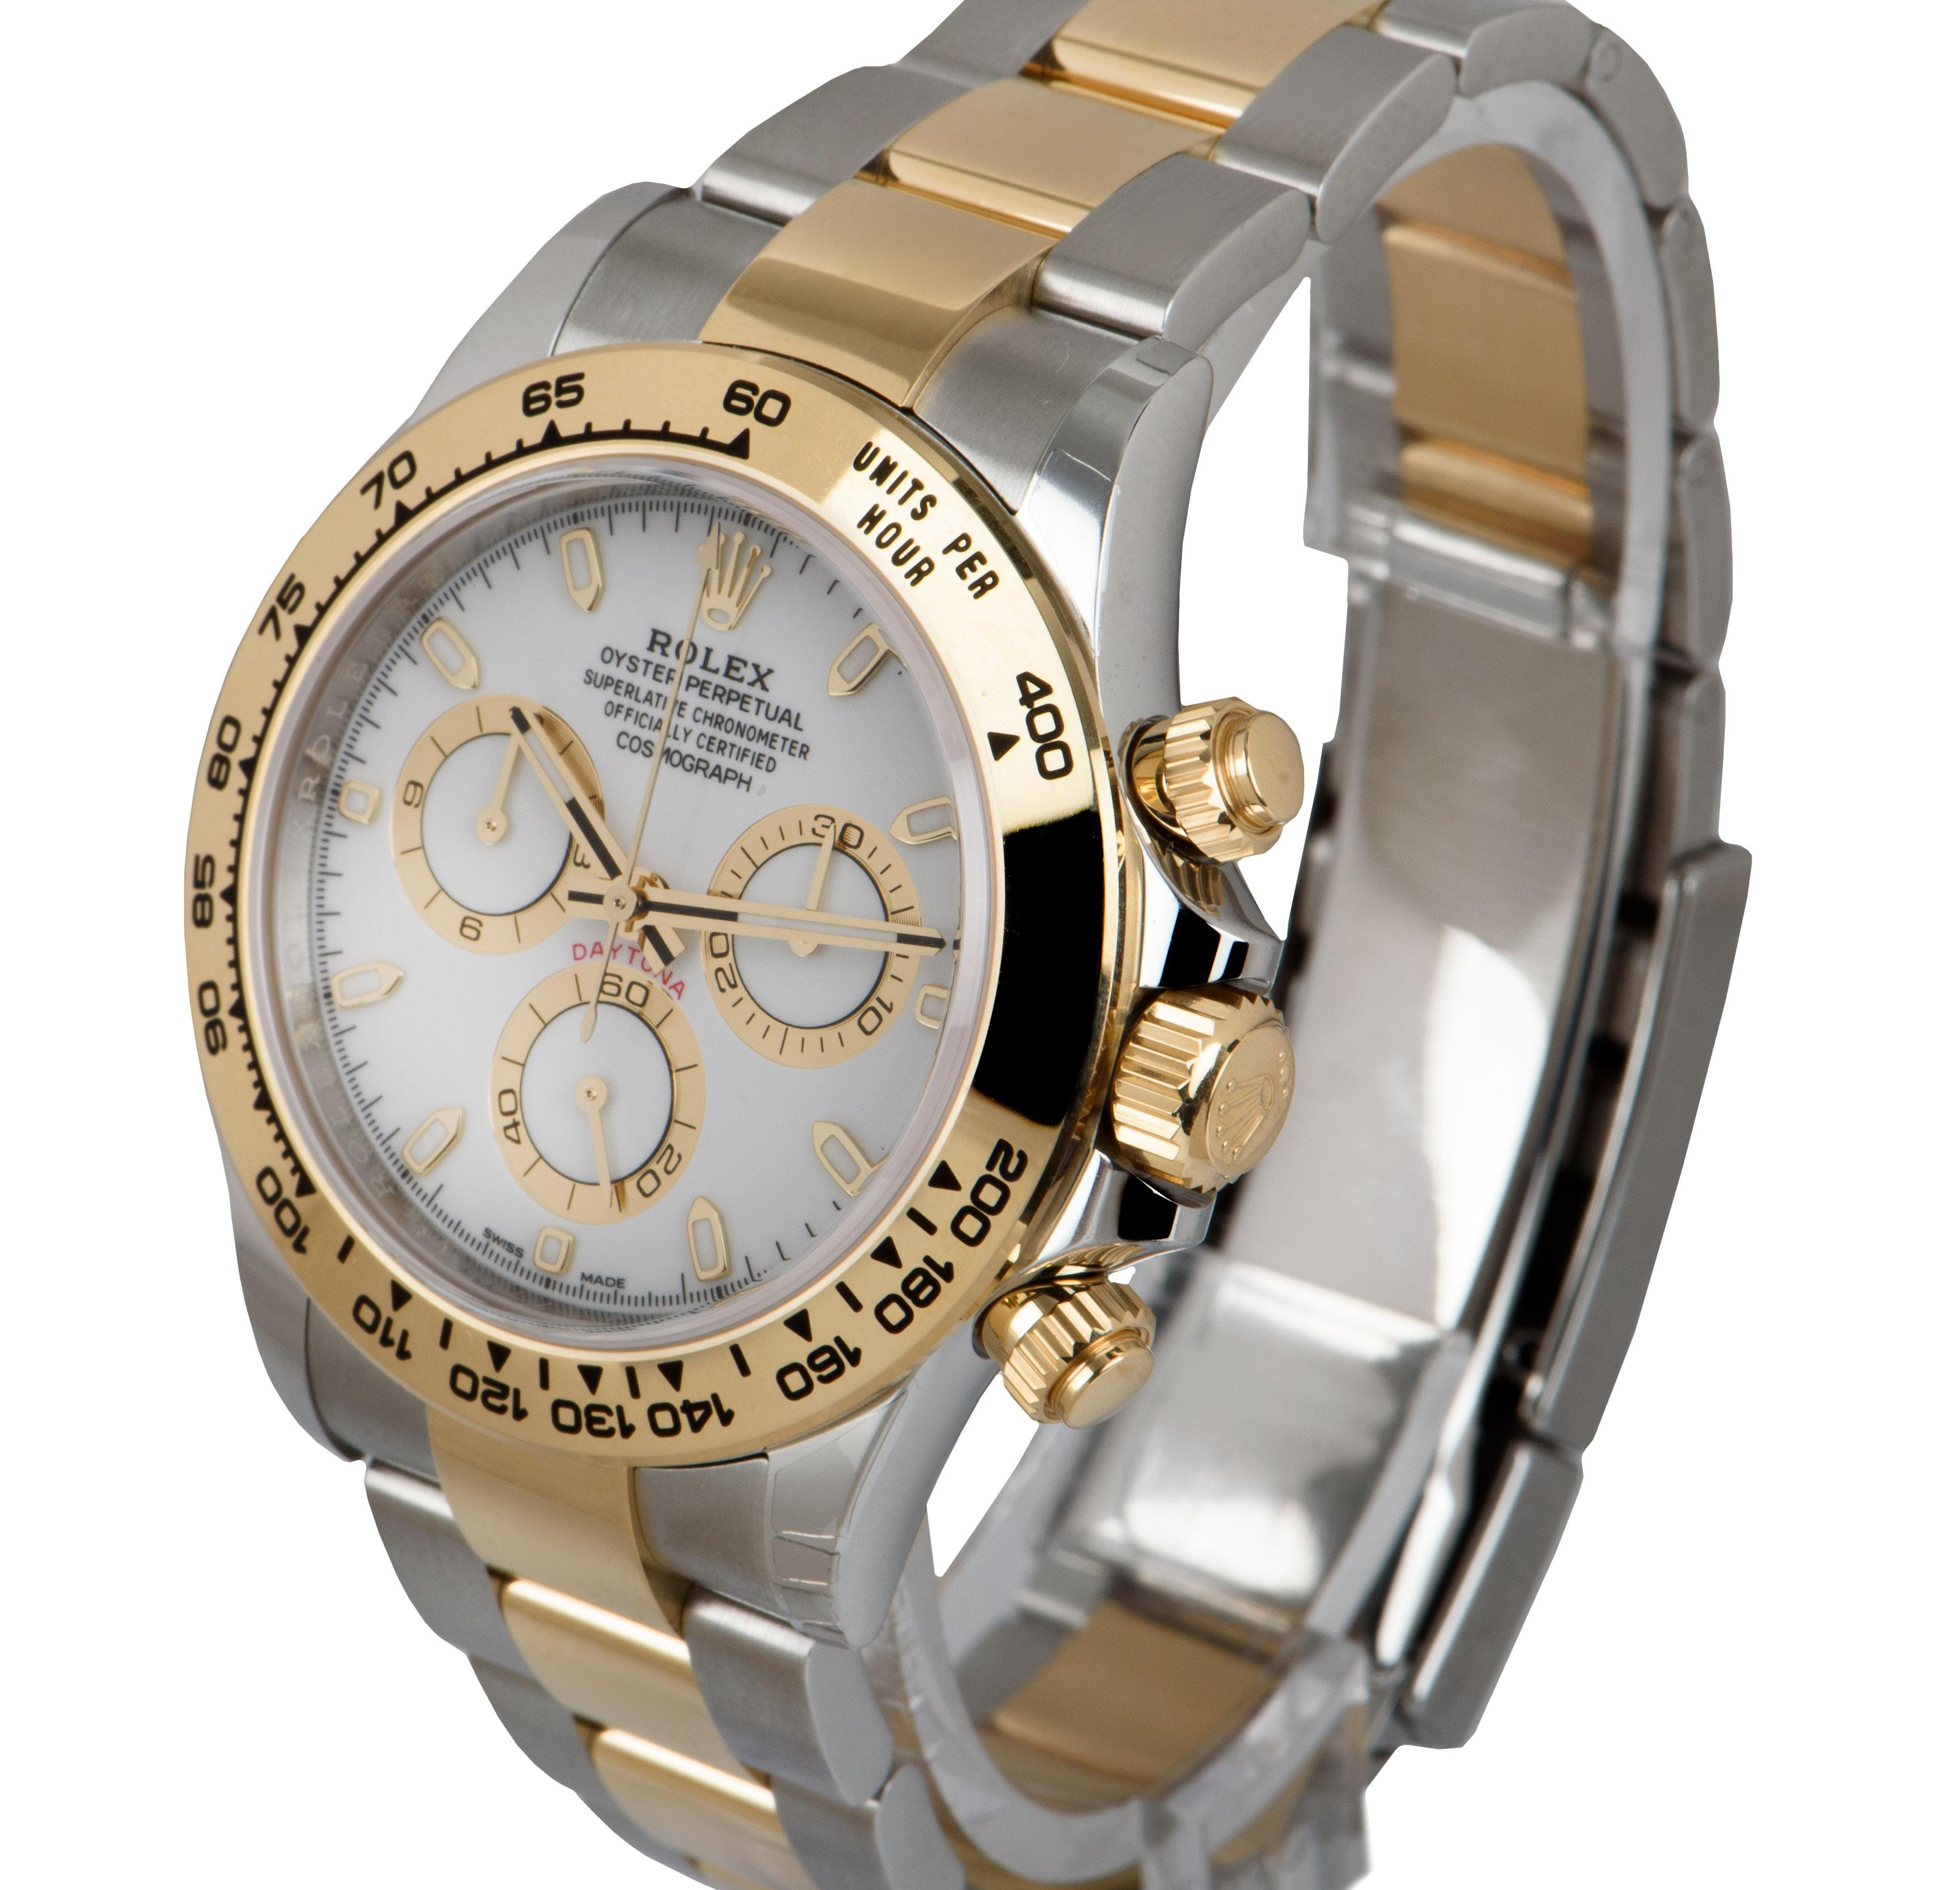 A 40 mm Unworn Stainless Steel & 18k Yellow Gold Oyster Perpetual Cosmograph Daytona Gents Wristwatch, white dial with applied hour markers, 30 minute recorder at 3 0'clock, small seconds at 6 0'clock, 12 hour recorder at 9 0'clock, a fixed 18k